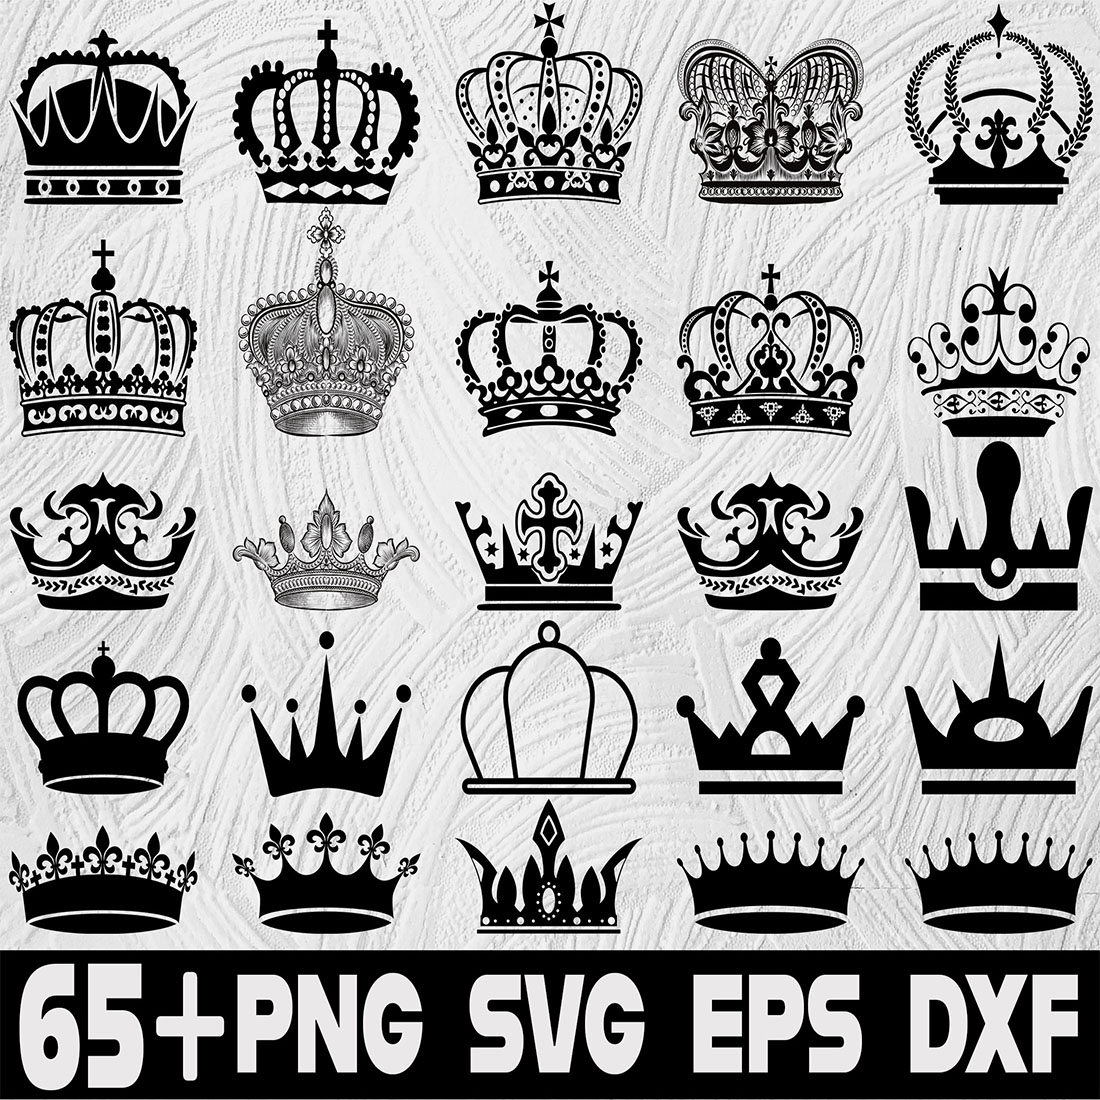 Royal Crown SVG, Princess Tiara SVG, King Crown, Queen Crown, Princess Crown, For Cricut, For Silhouette, Cut Files, Png, Dxf, Svg Files cover image.